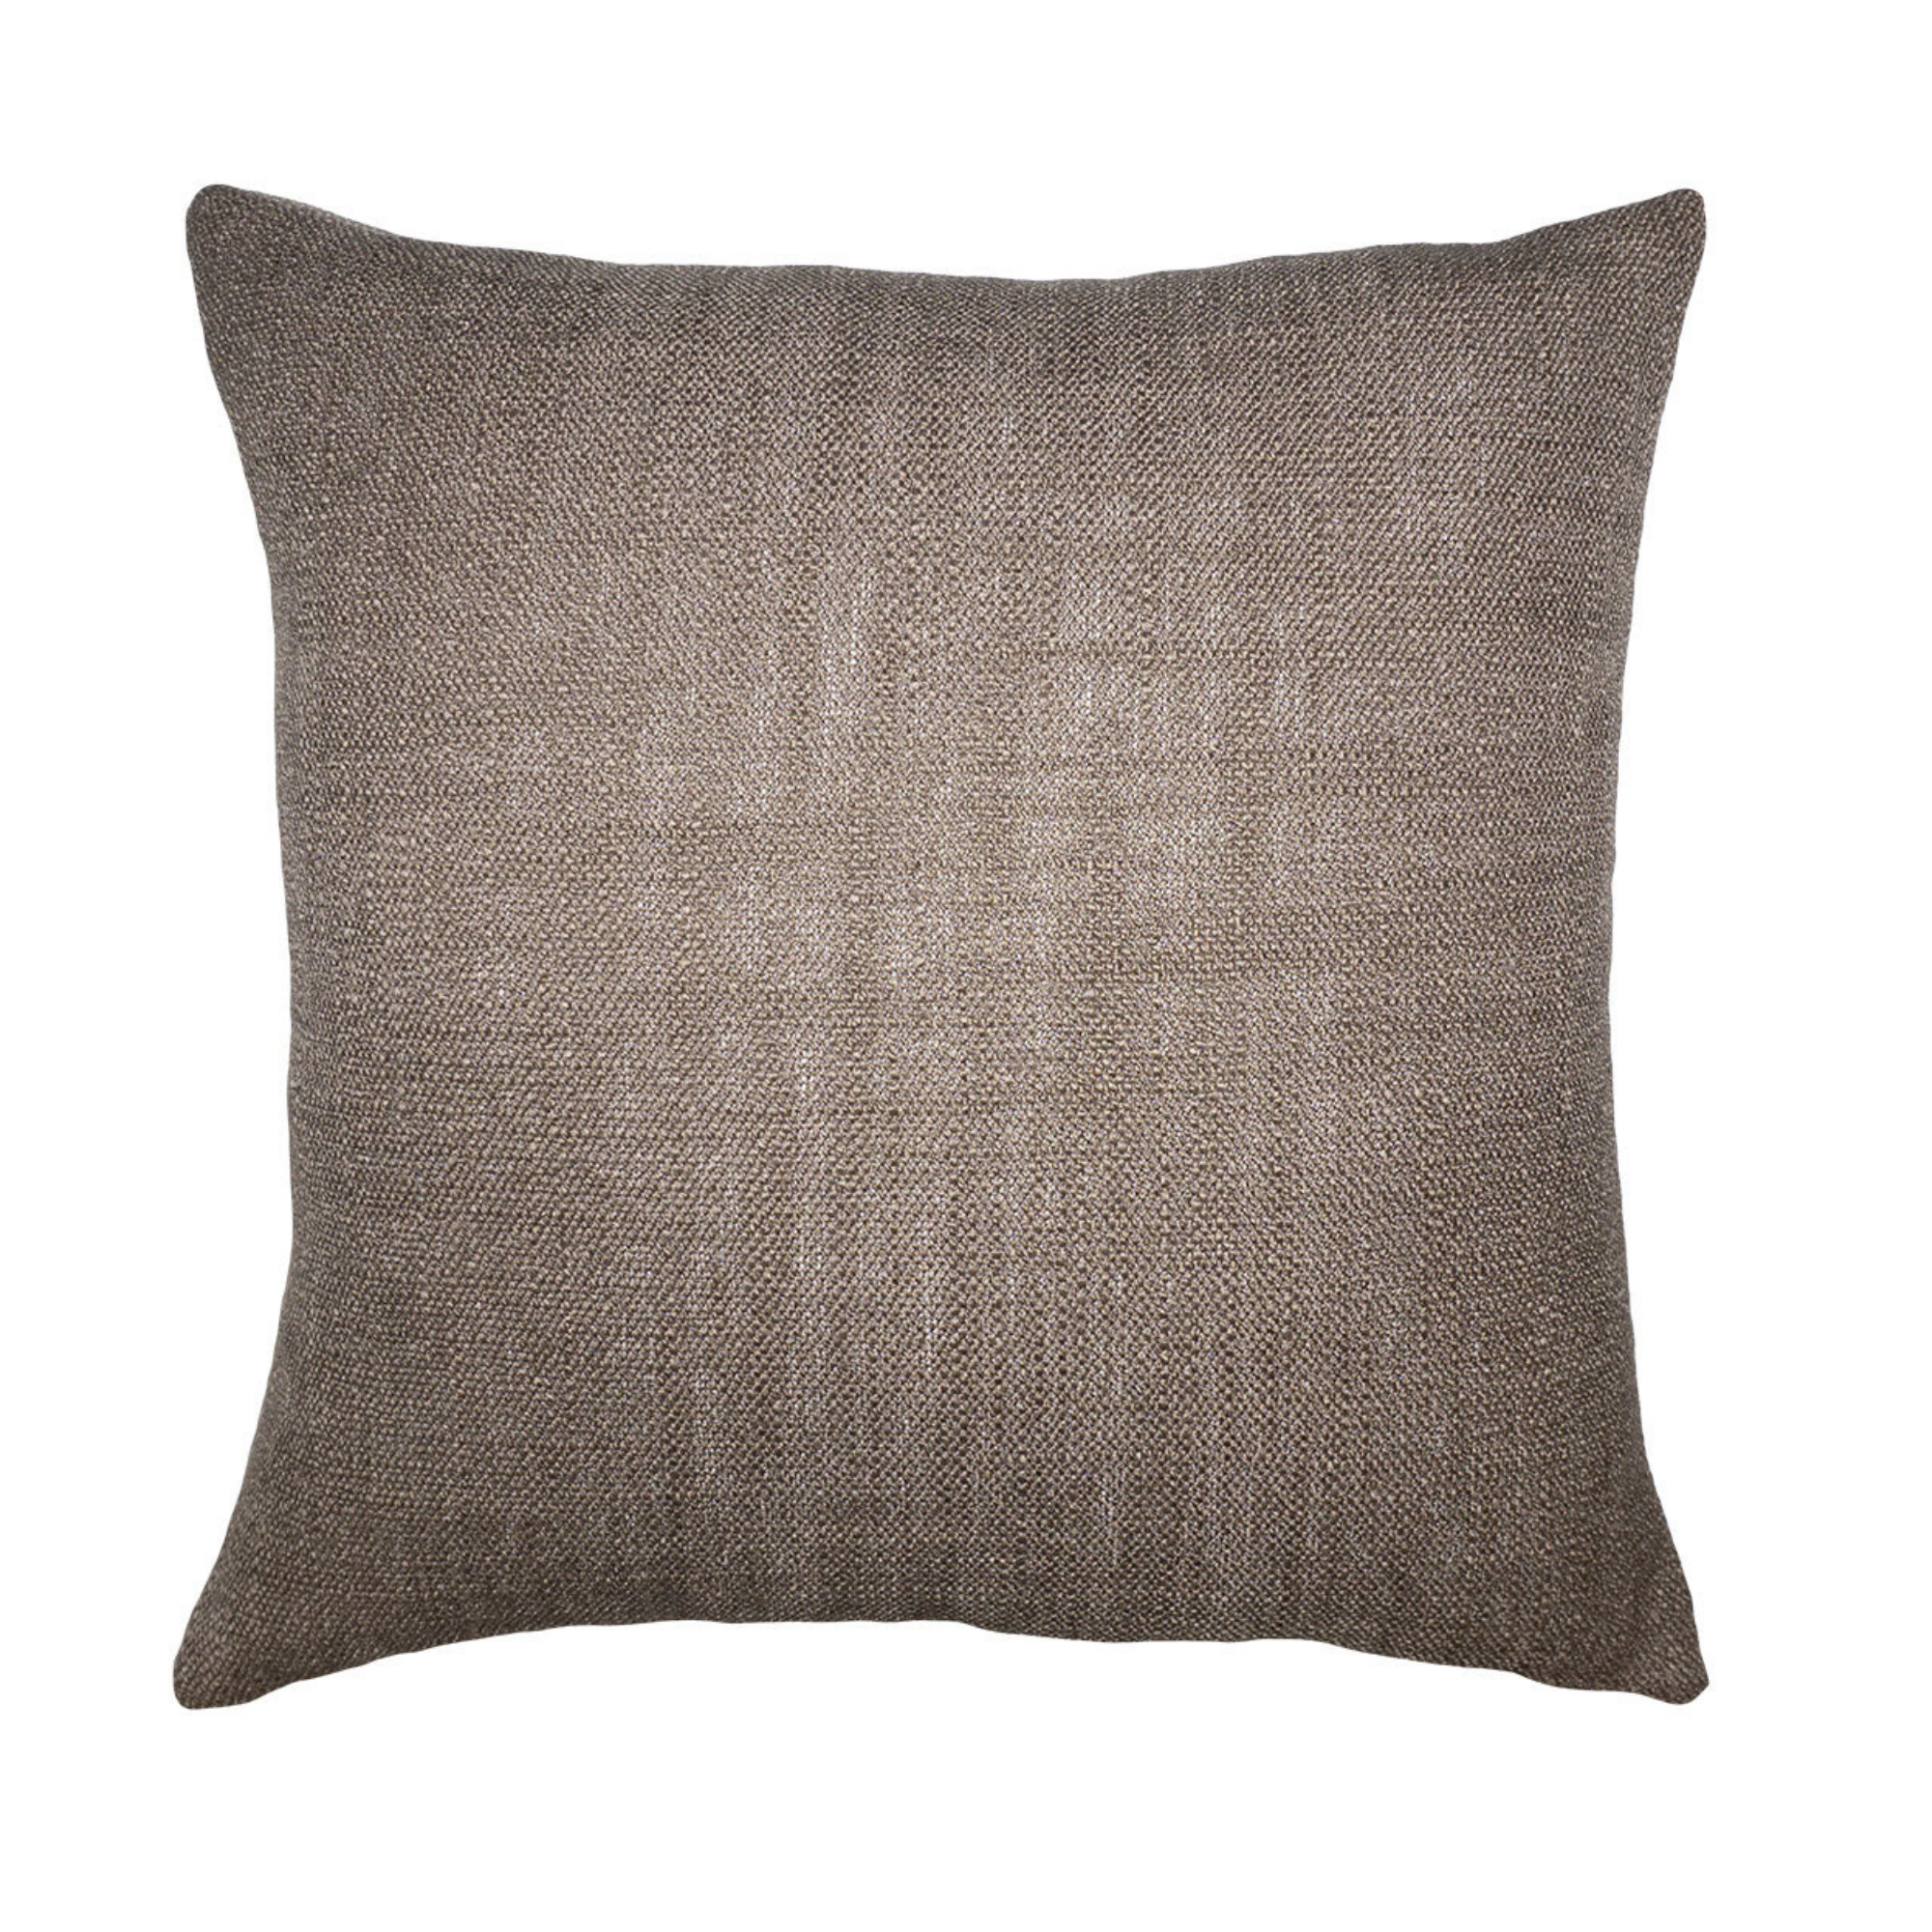 Hopsack Solid Pillow